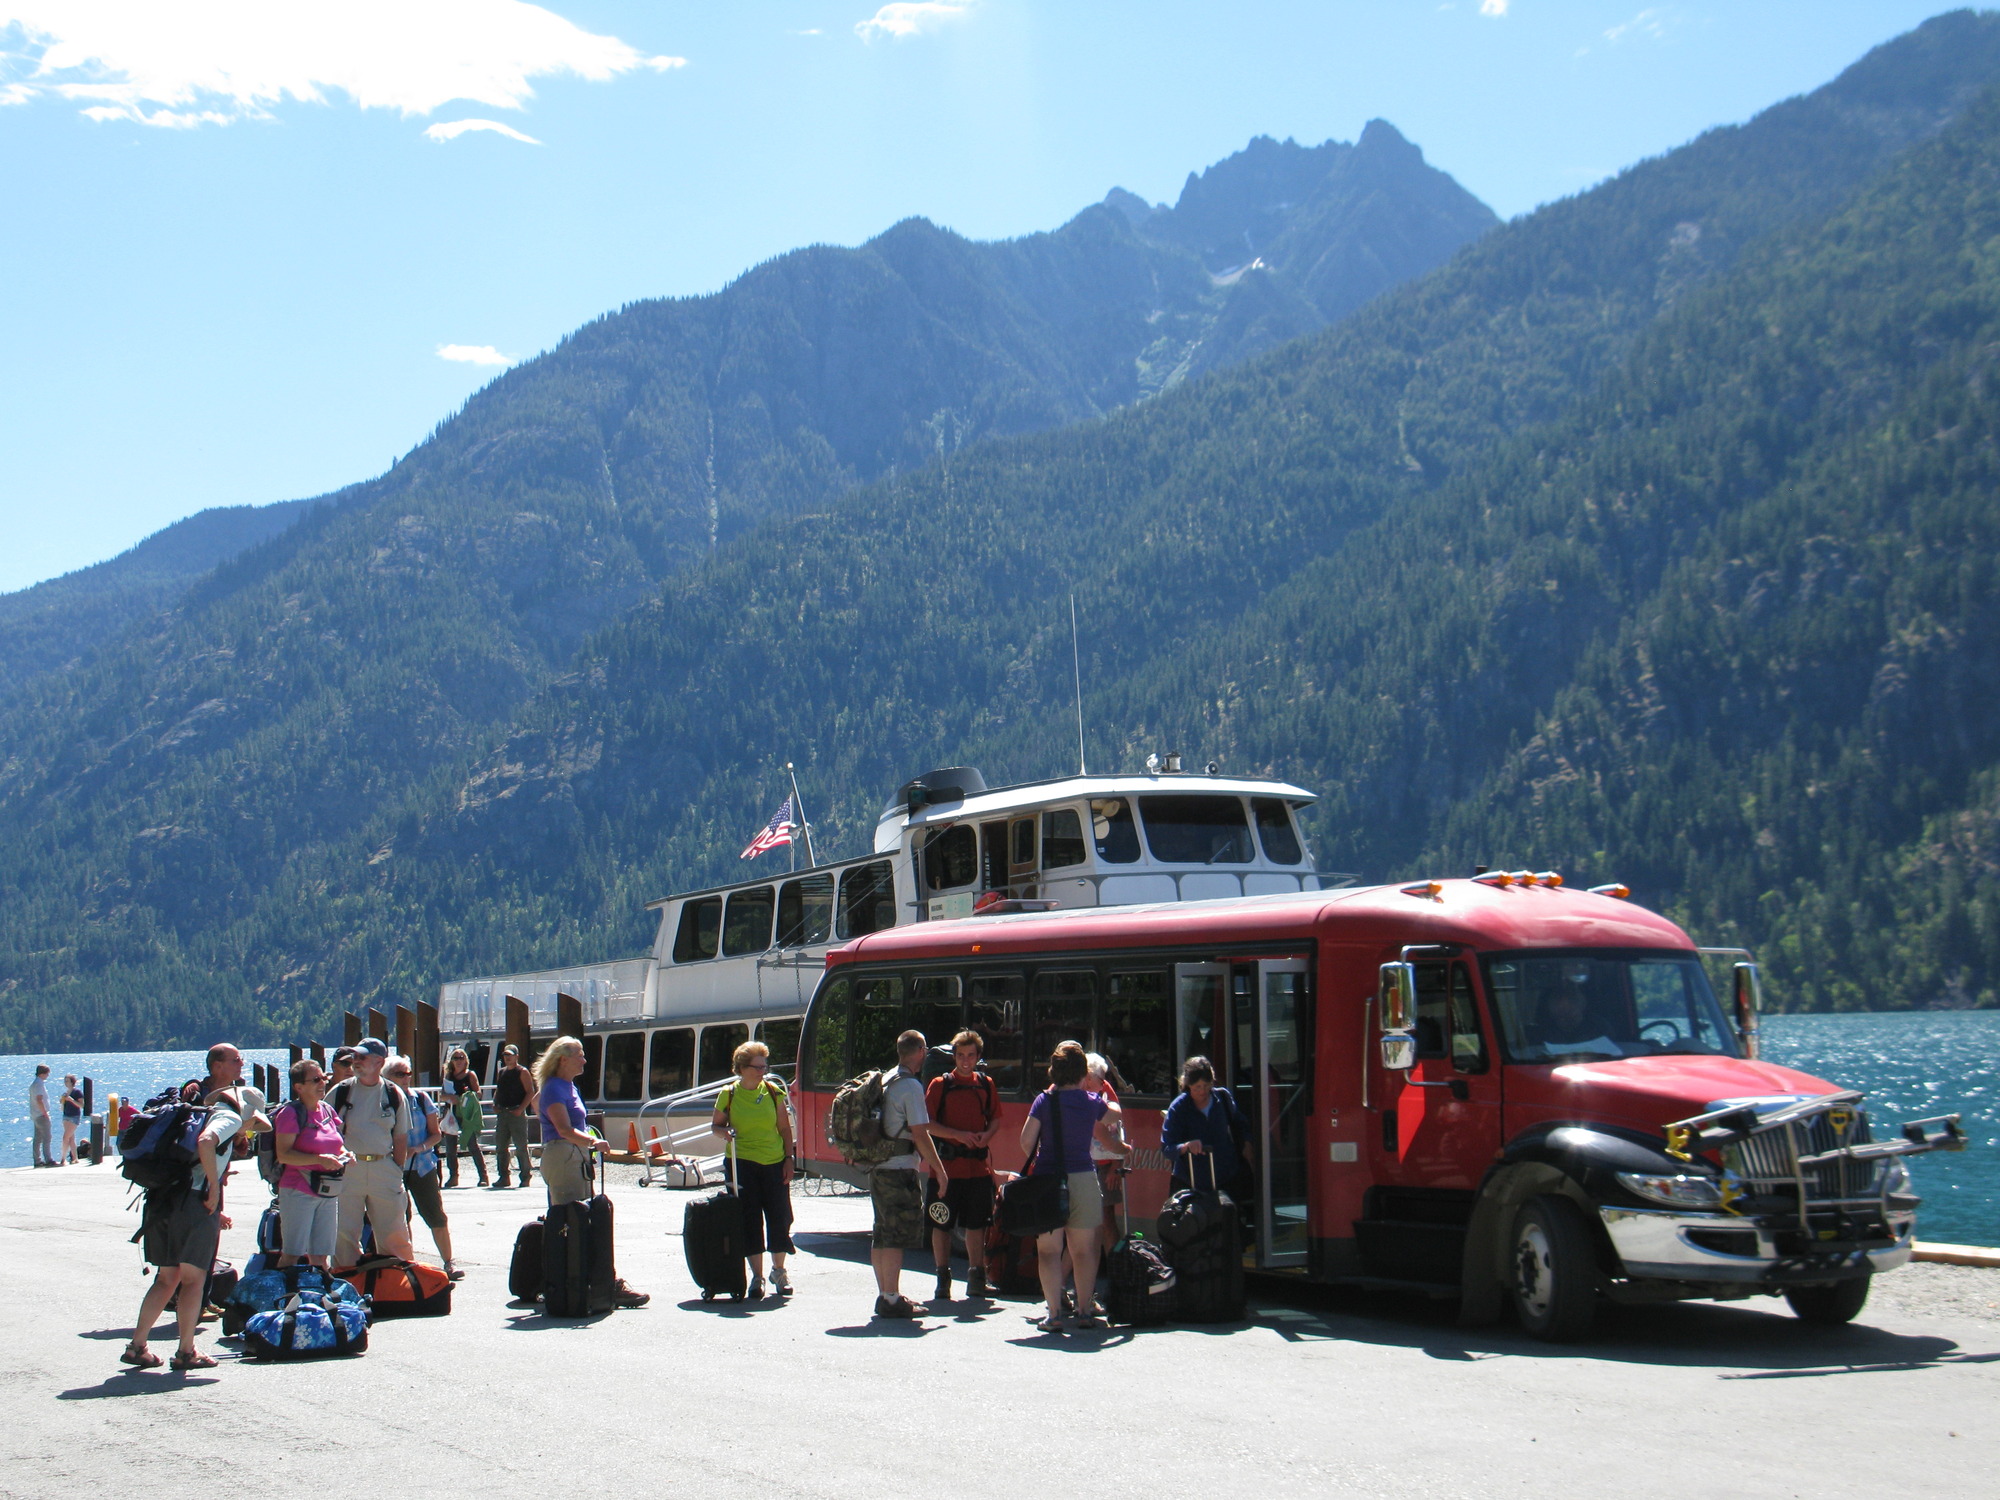 A group of fifteen people with bags wait to board a bus by a large lake and ferry boat.